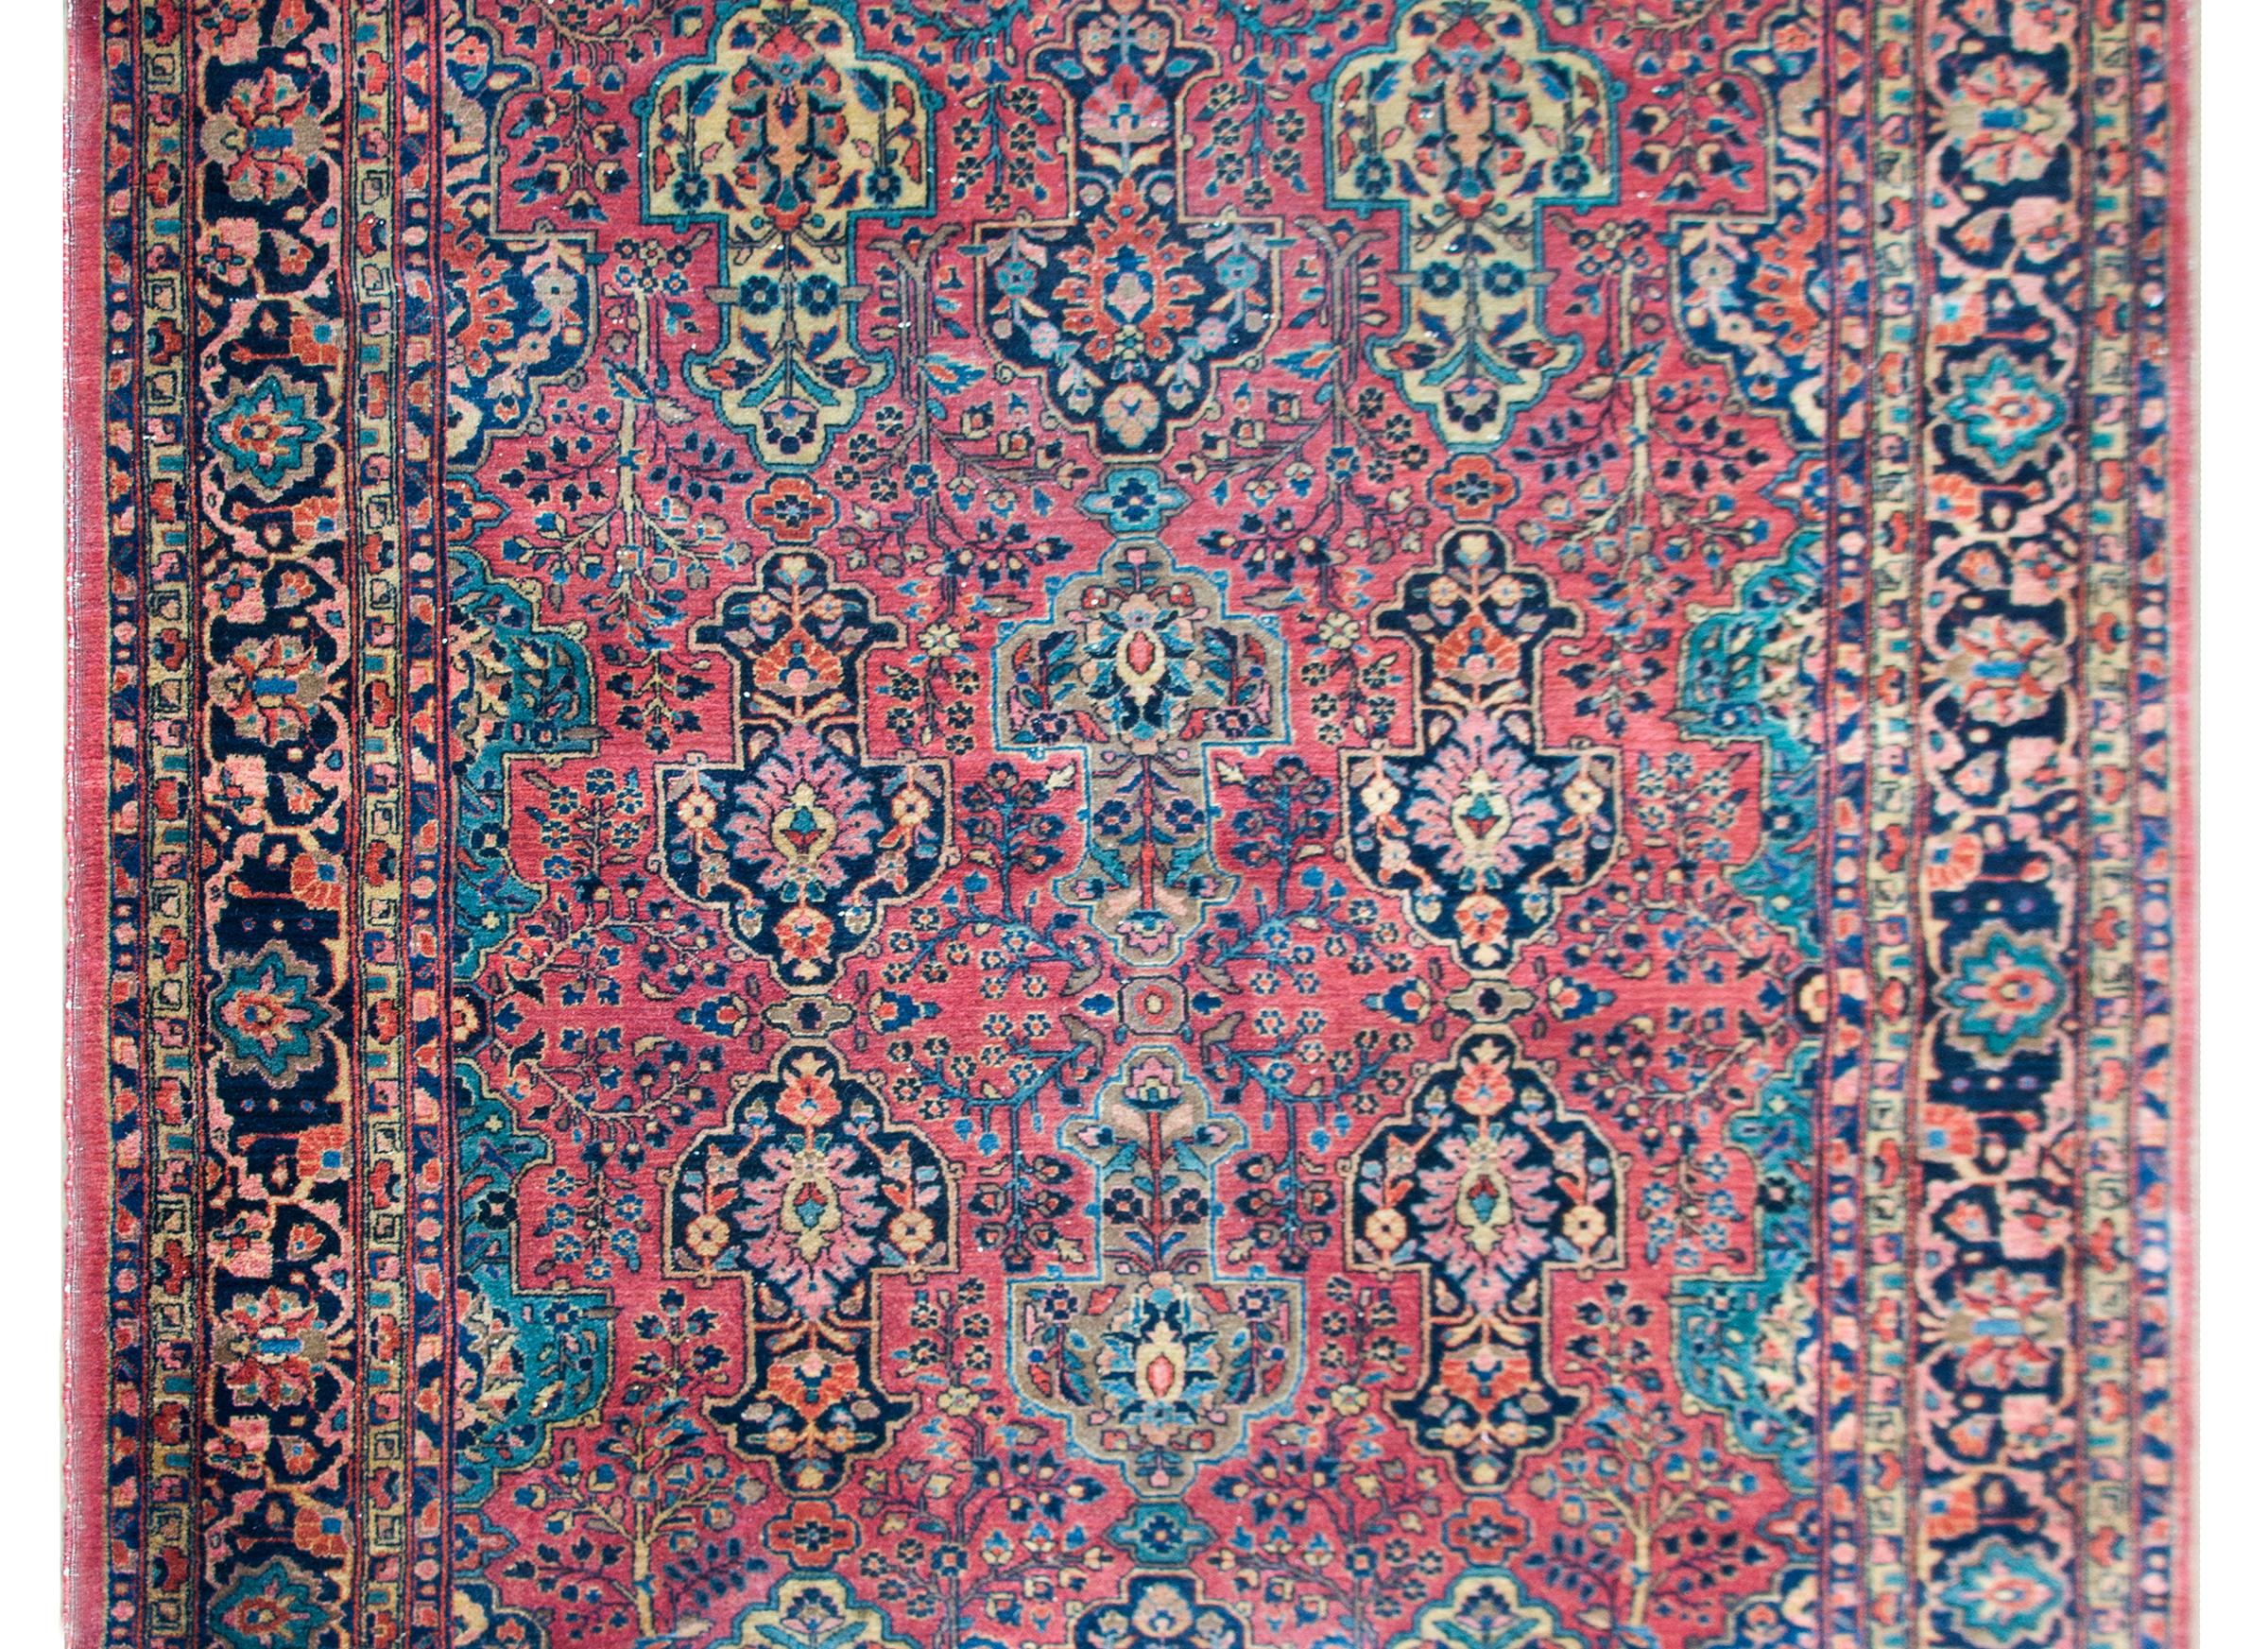 A fantastic early 20th century Persian Sarouk rug with a beautiful mirrored floral patterned field with large stylized floral shapes amidst a densely woven field of trees-of-life and other flowers, all woven in beautiful indigos, pinks, creams, and